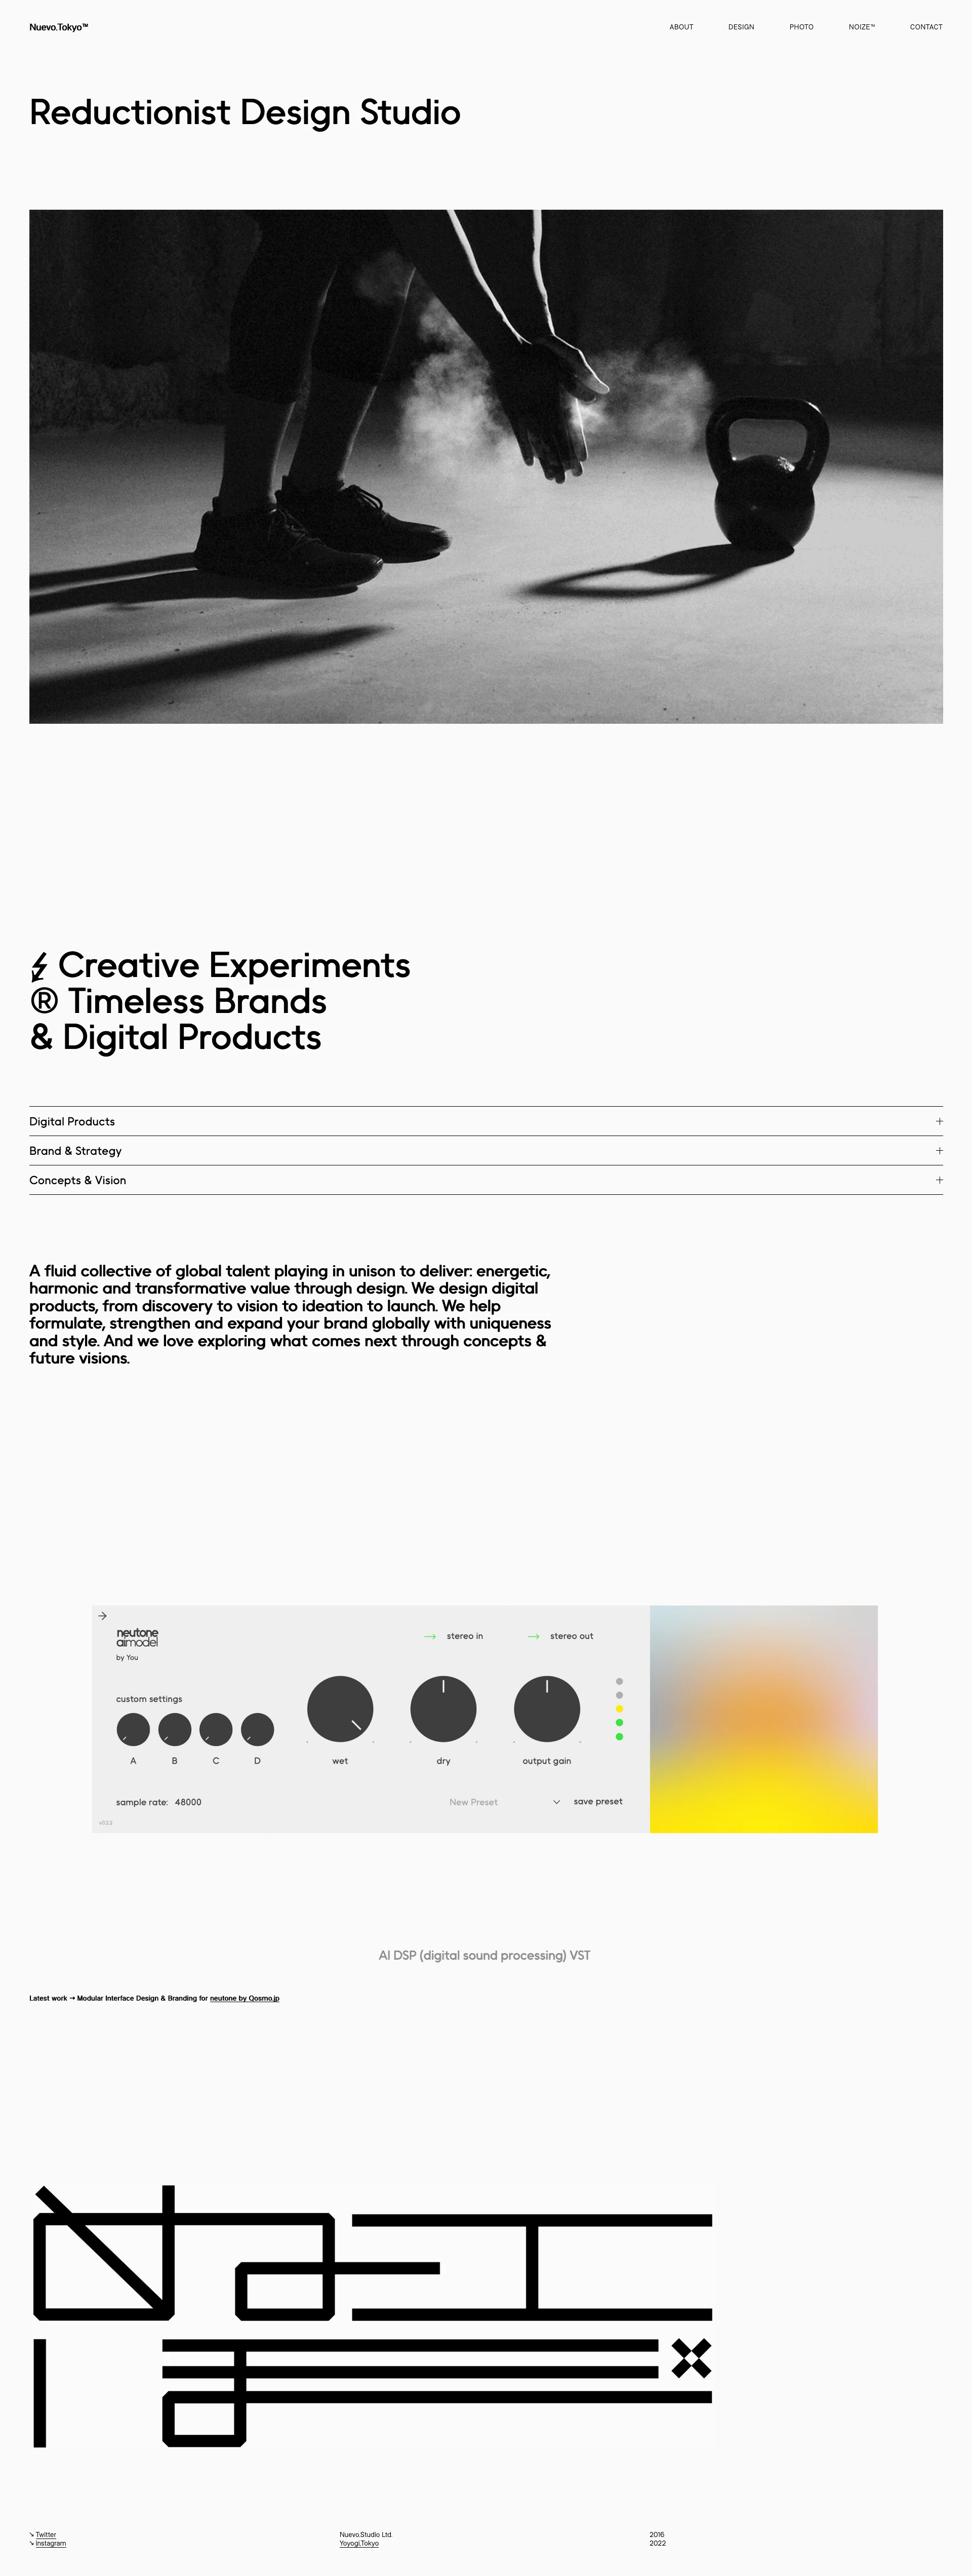 Nuevo.Tokyo Landing Page Example: Reductionist Design Studio. Creative Experiments, Brands and Digital Products.